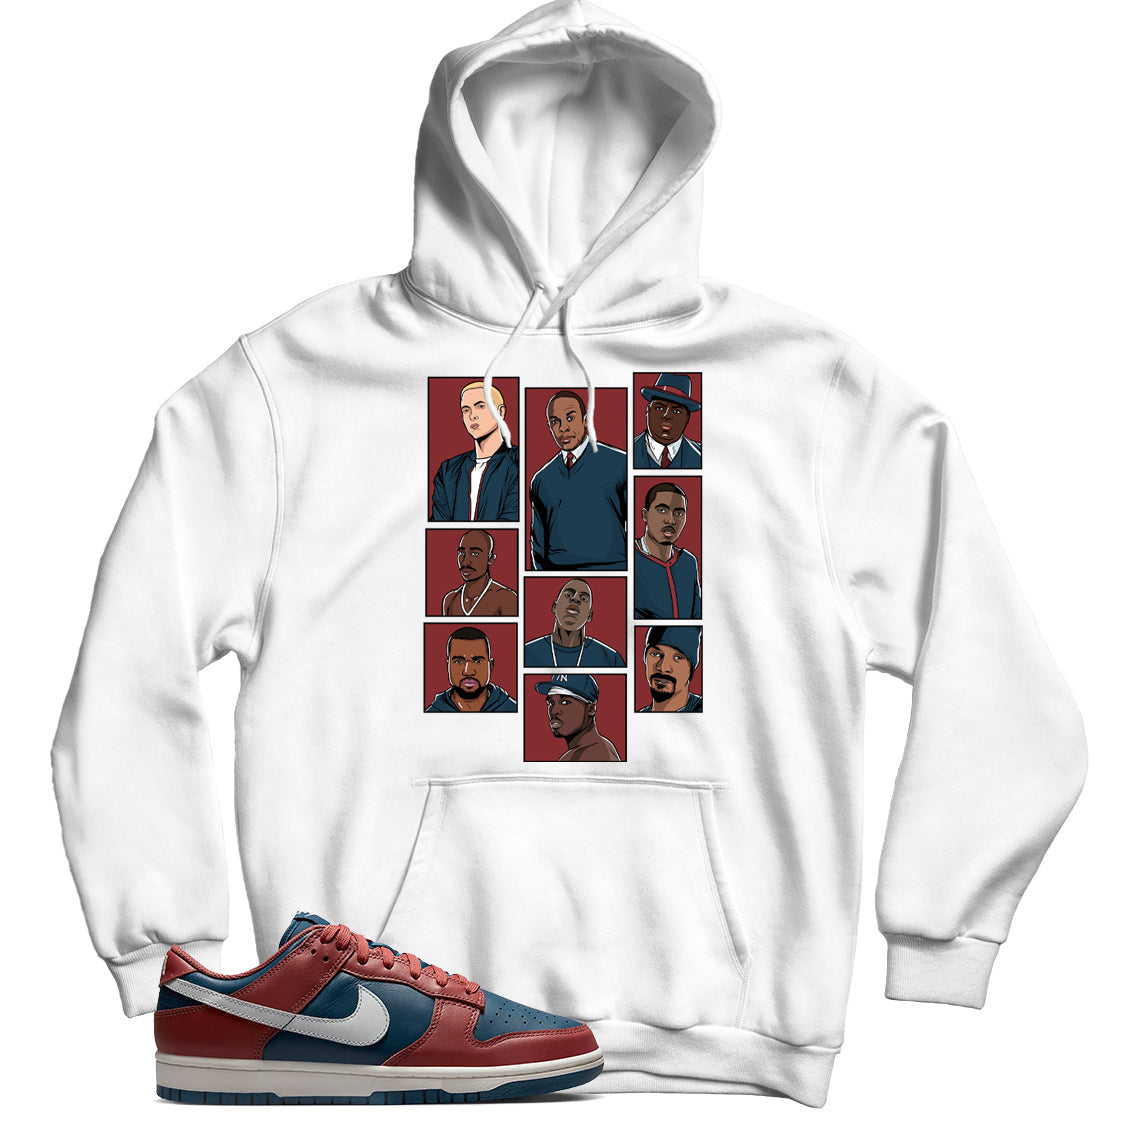 Dunk Low Canyon Rust hoodie